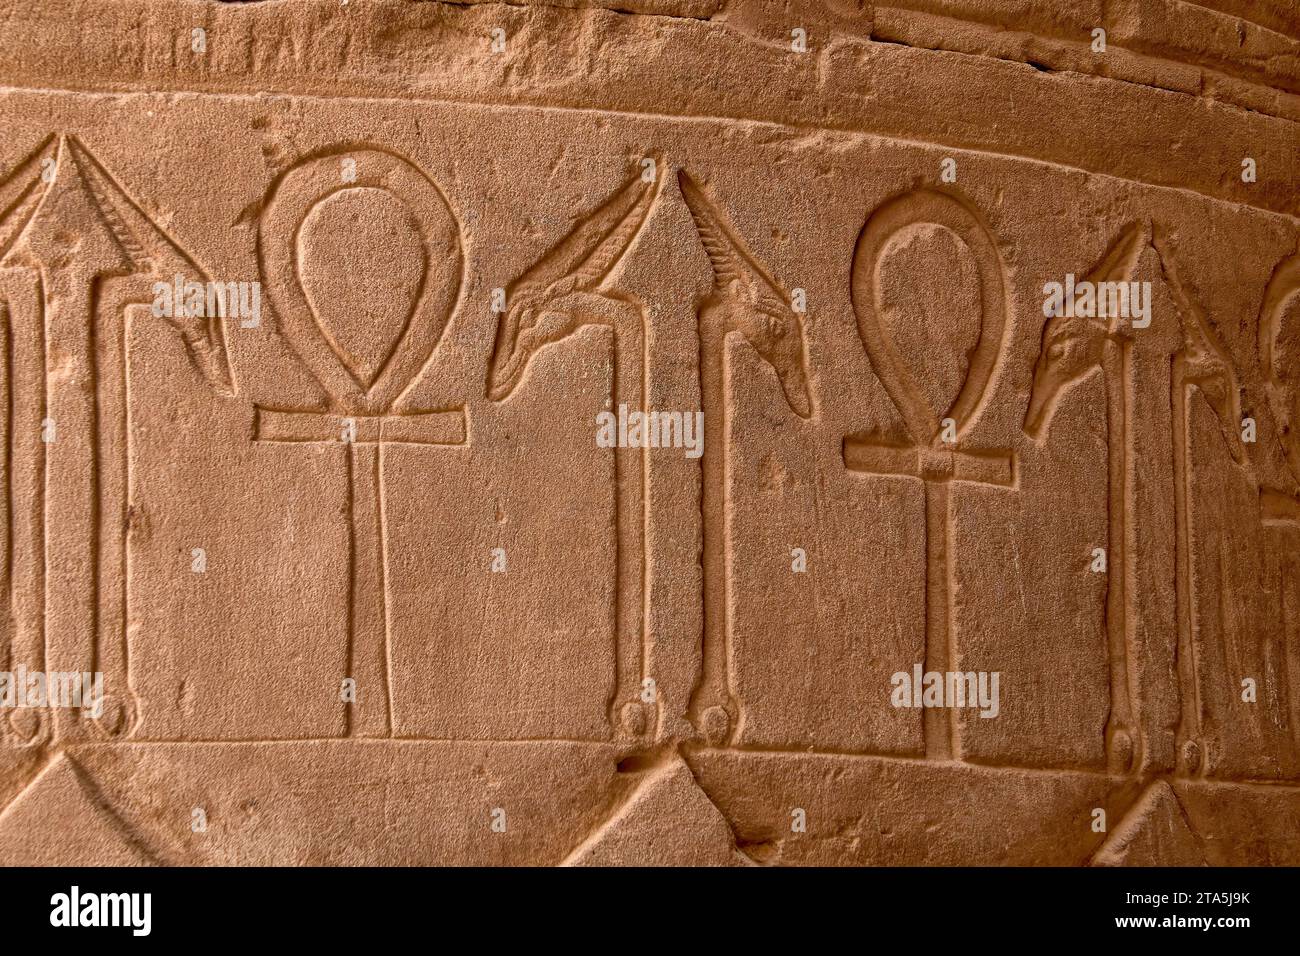 The Egyptian hieroglyphs carved into the stone on the walls of the Edfu temple in Egypt. Stock Photo